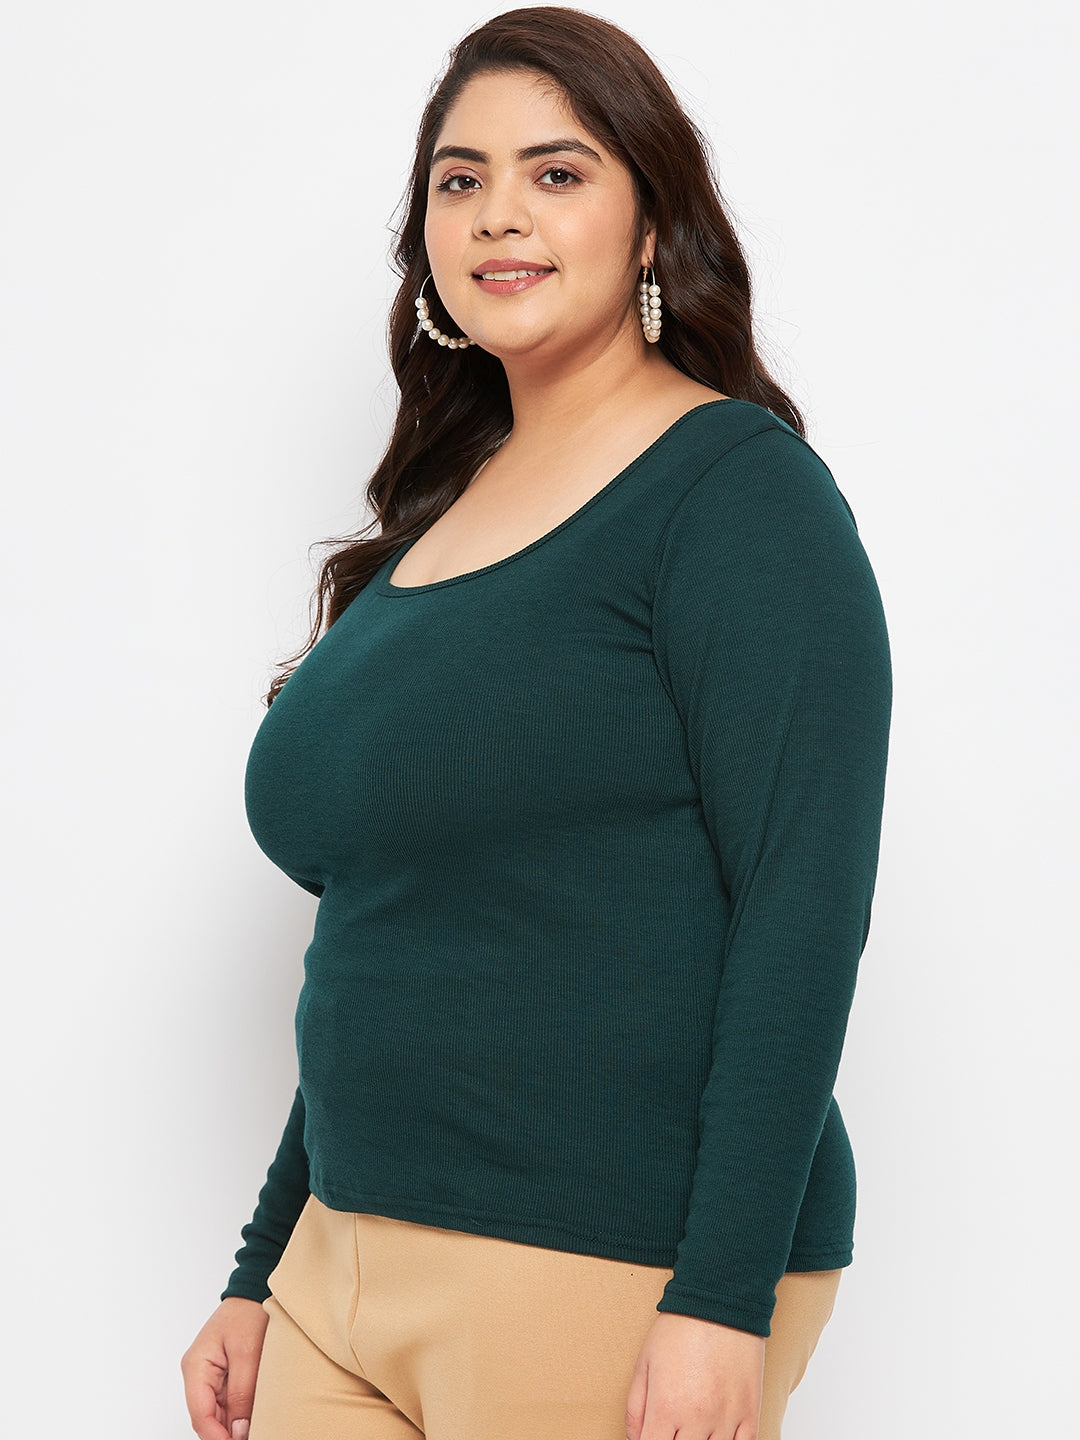 Bottle Green Solid Full Sleeves Top